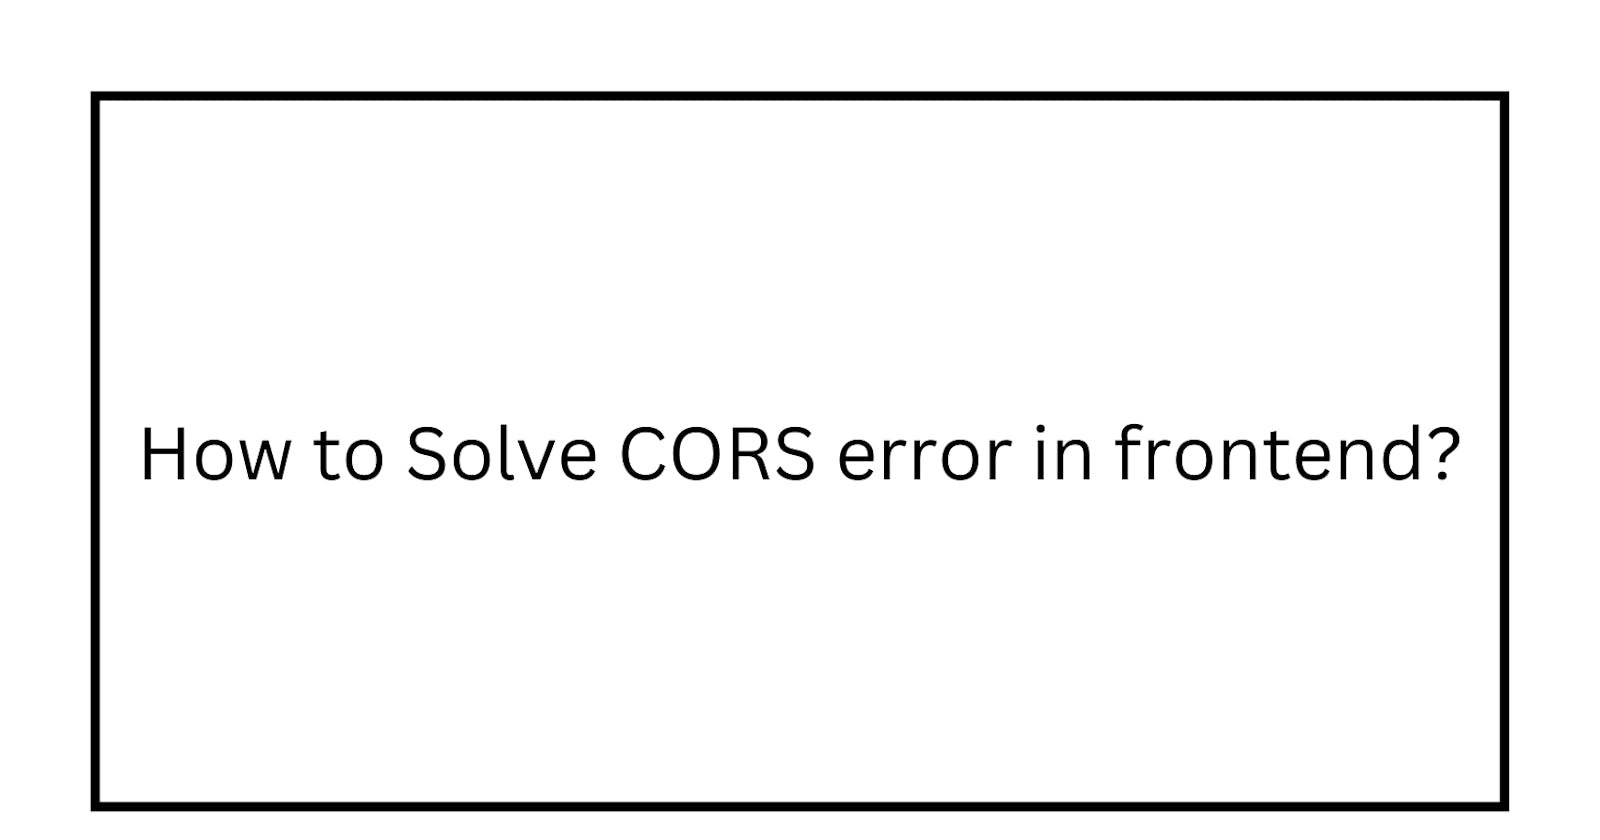 What the heck is CORS error anyway and how to solve it?